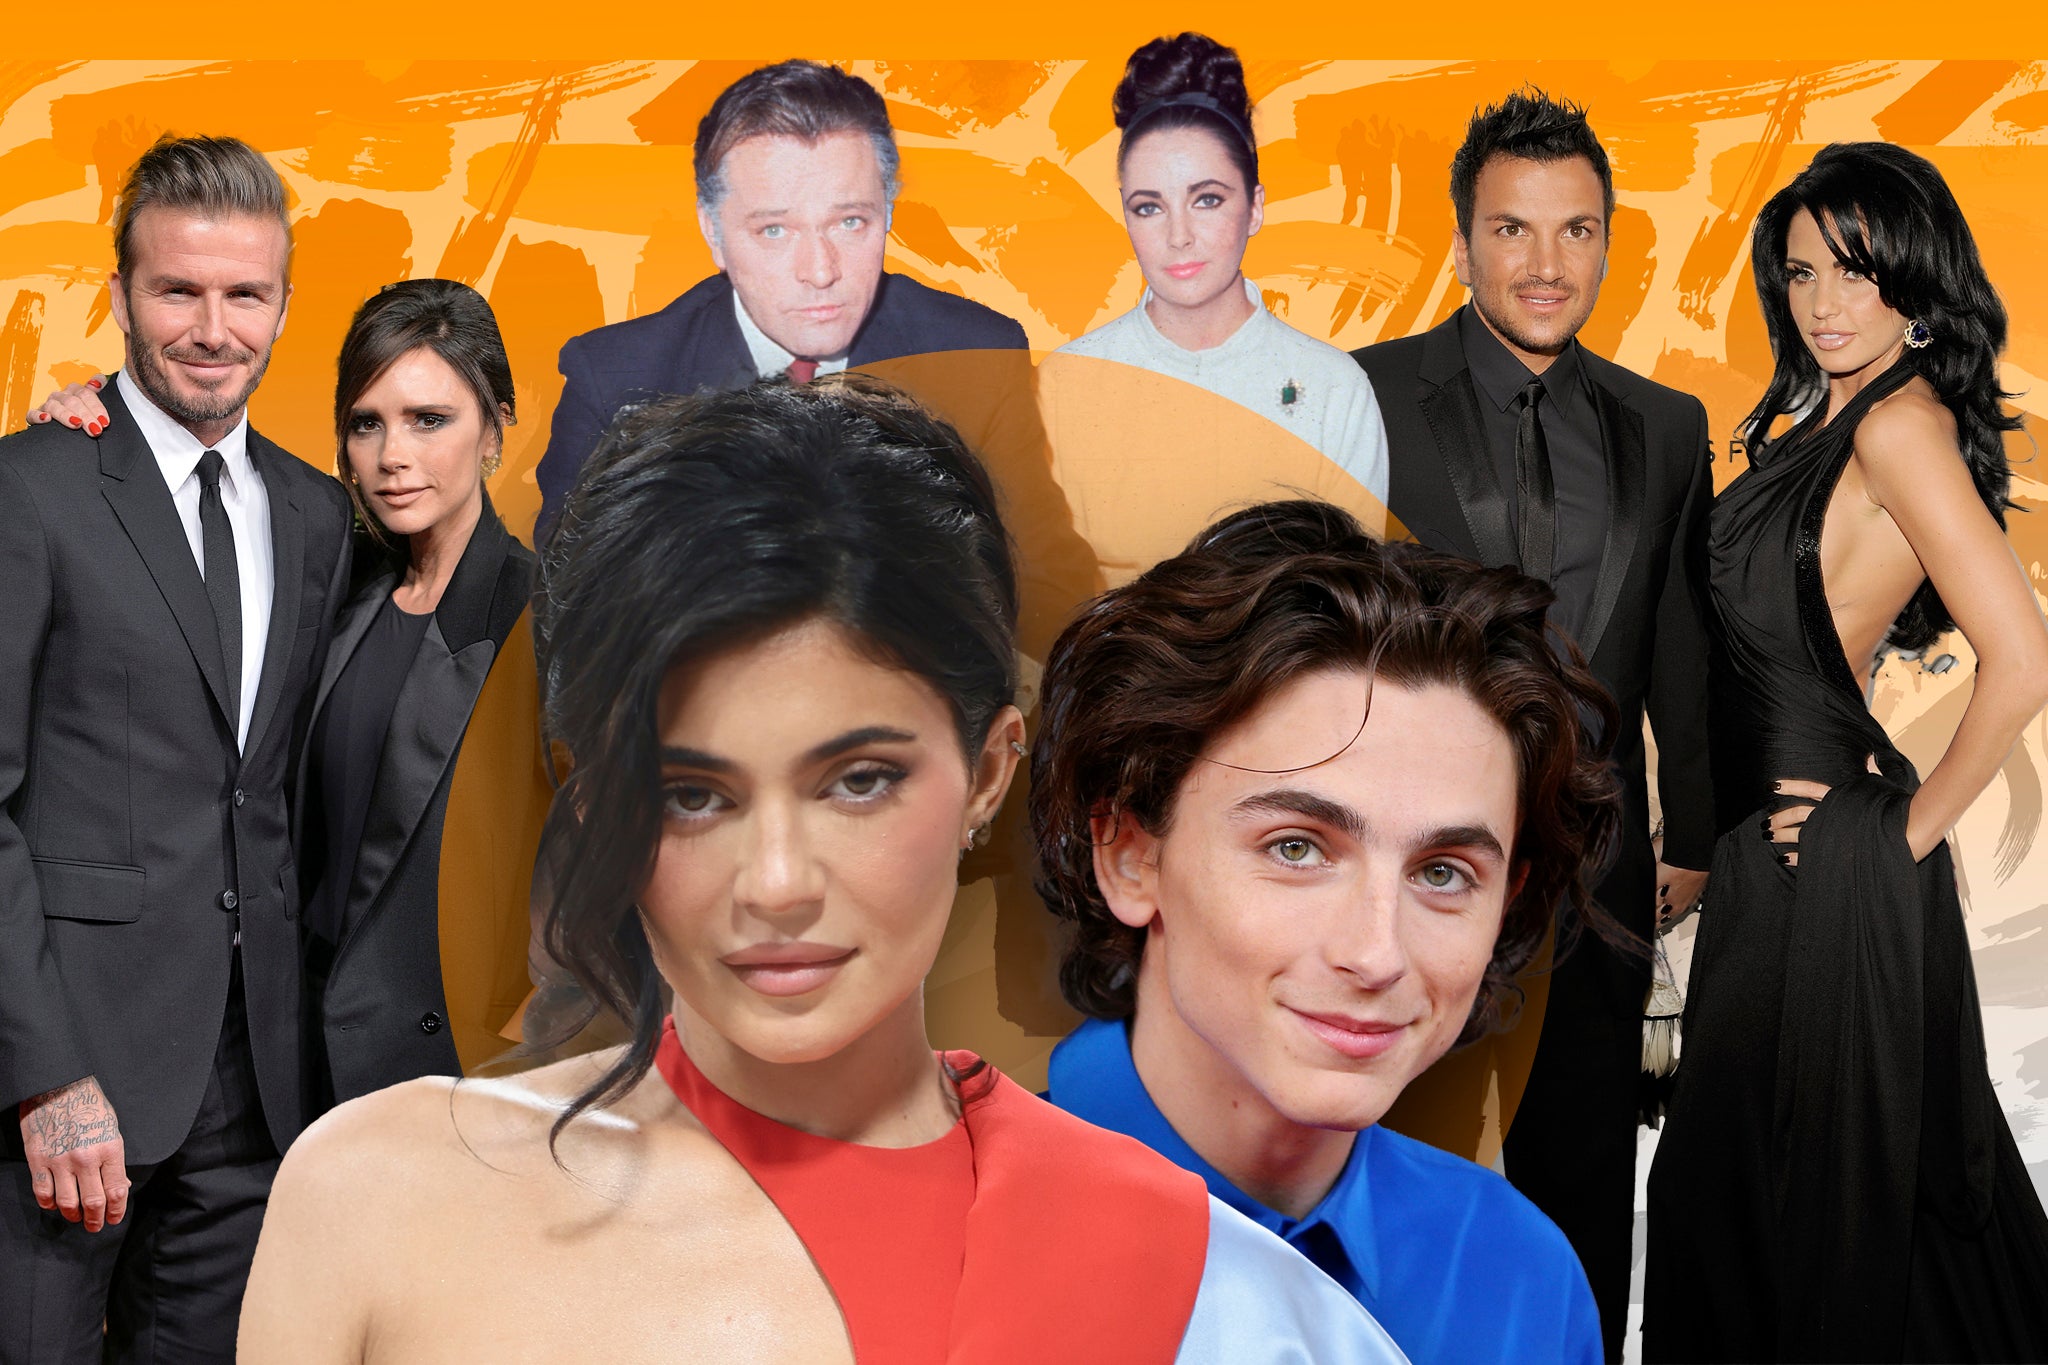 Celebrity couples past and present: David and Victoria Beckham, Richard Burton and Elizabeth Taylor, Peter Andre and Katie Price, Kylie Jenner and Timothee Chalamet